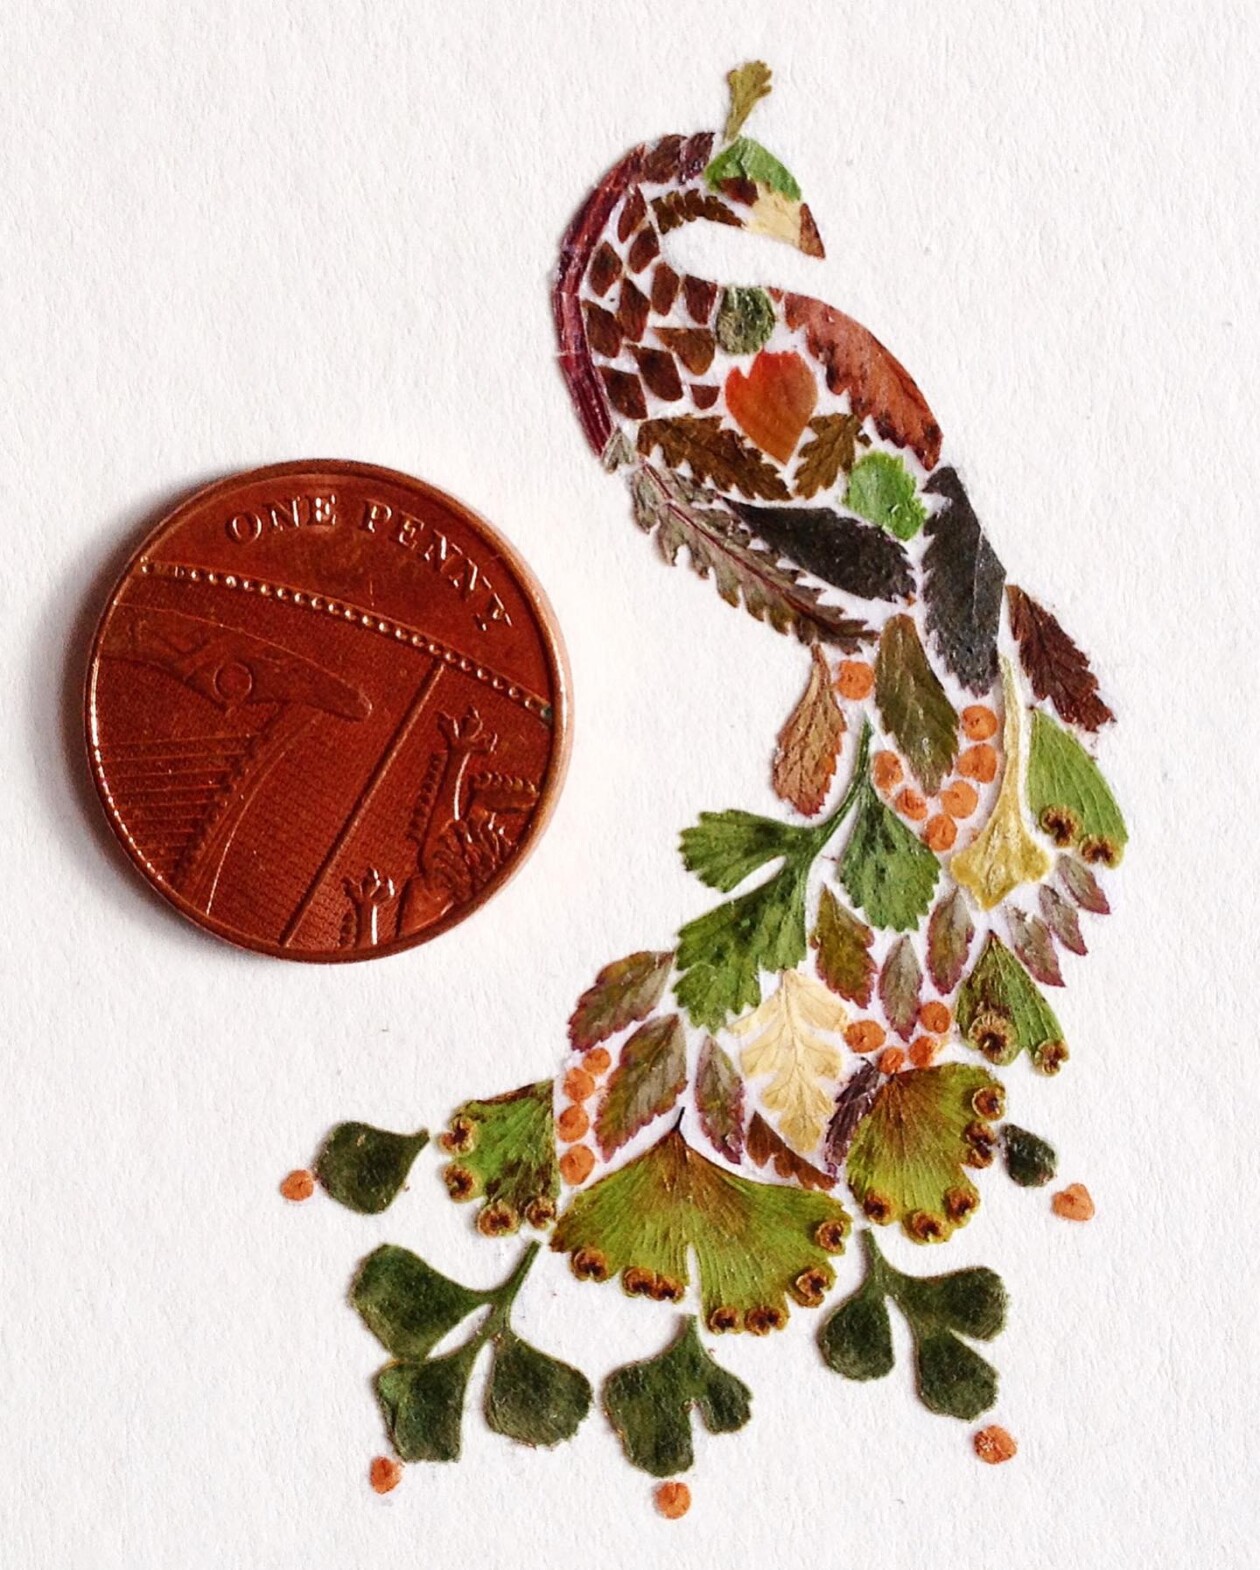 Illustrations Made Of Pressed Leaves And Flowers By Helen Ahpornsiri (19)